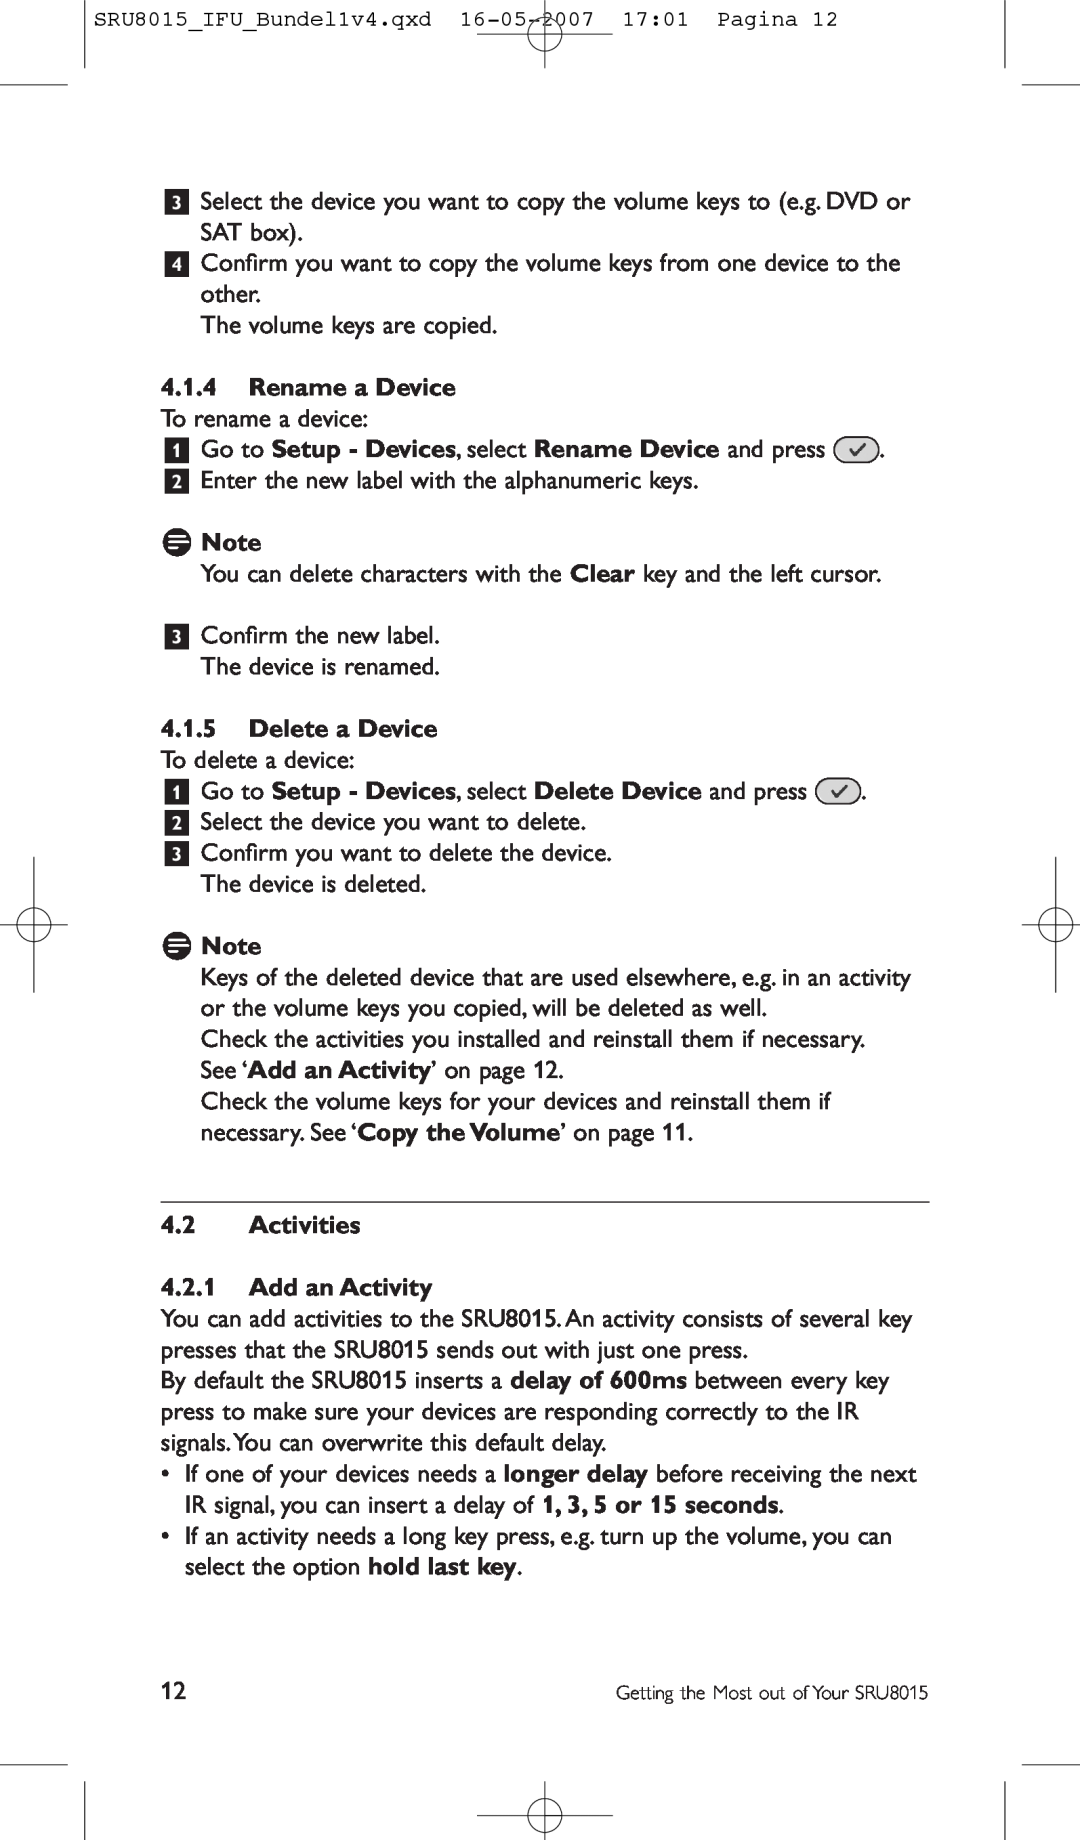 Philips SRU8015 manual Rename a Device To rename a device, Delete a Device, Activities 4.2.1 Add an Activity, D Note 